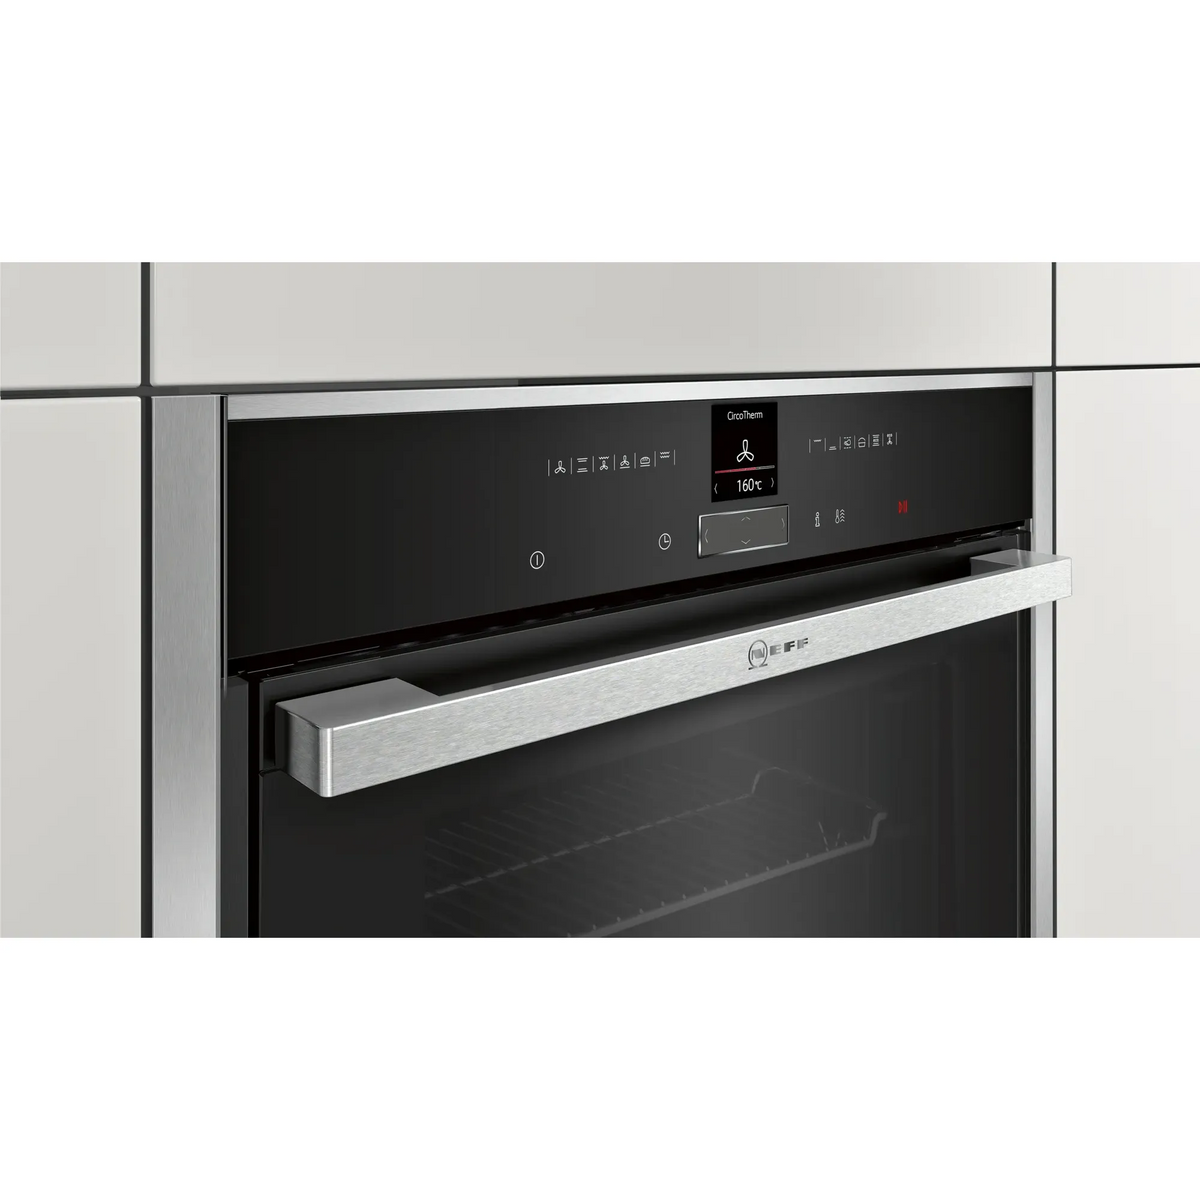 Neff N70 71L Built-In Electric Single Oven - Stainless Steel | B47CR32N0B from Neff - DID Electrical